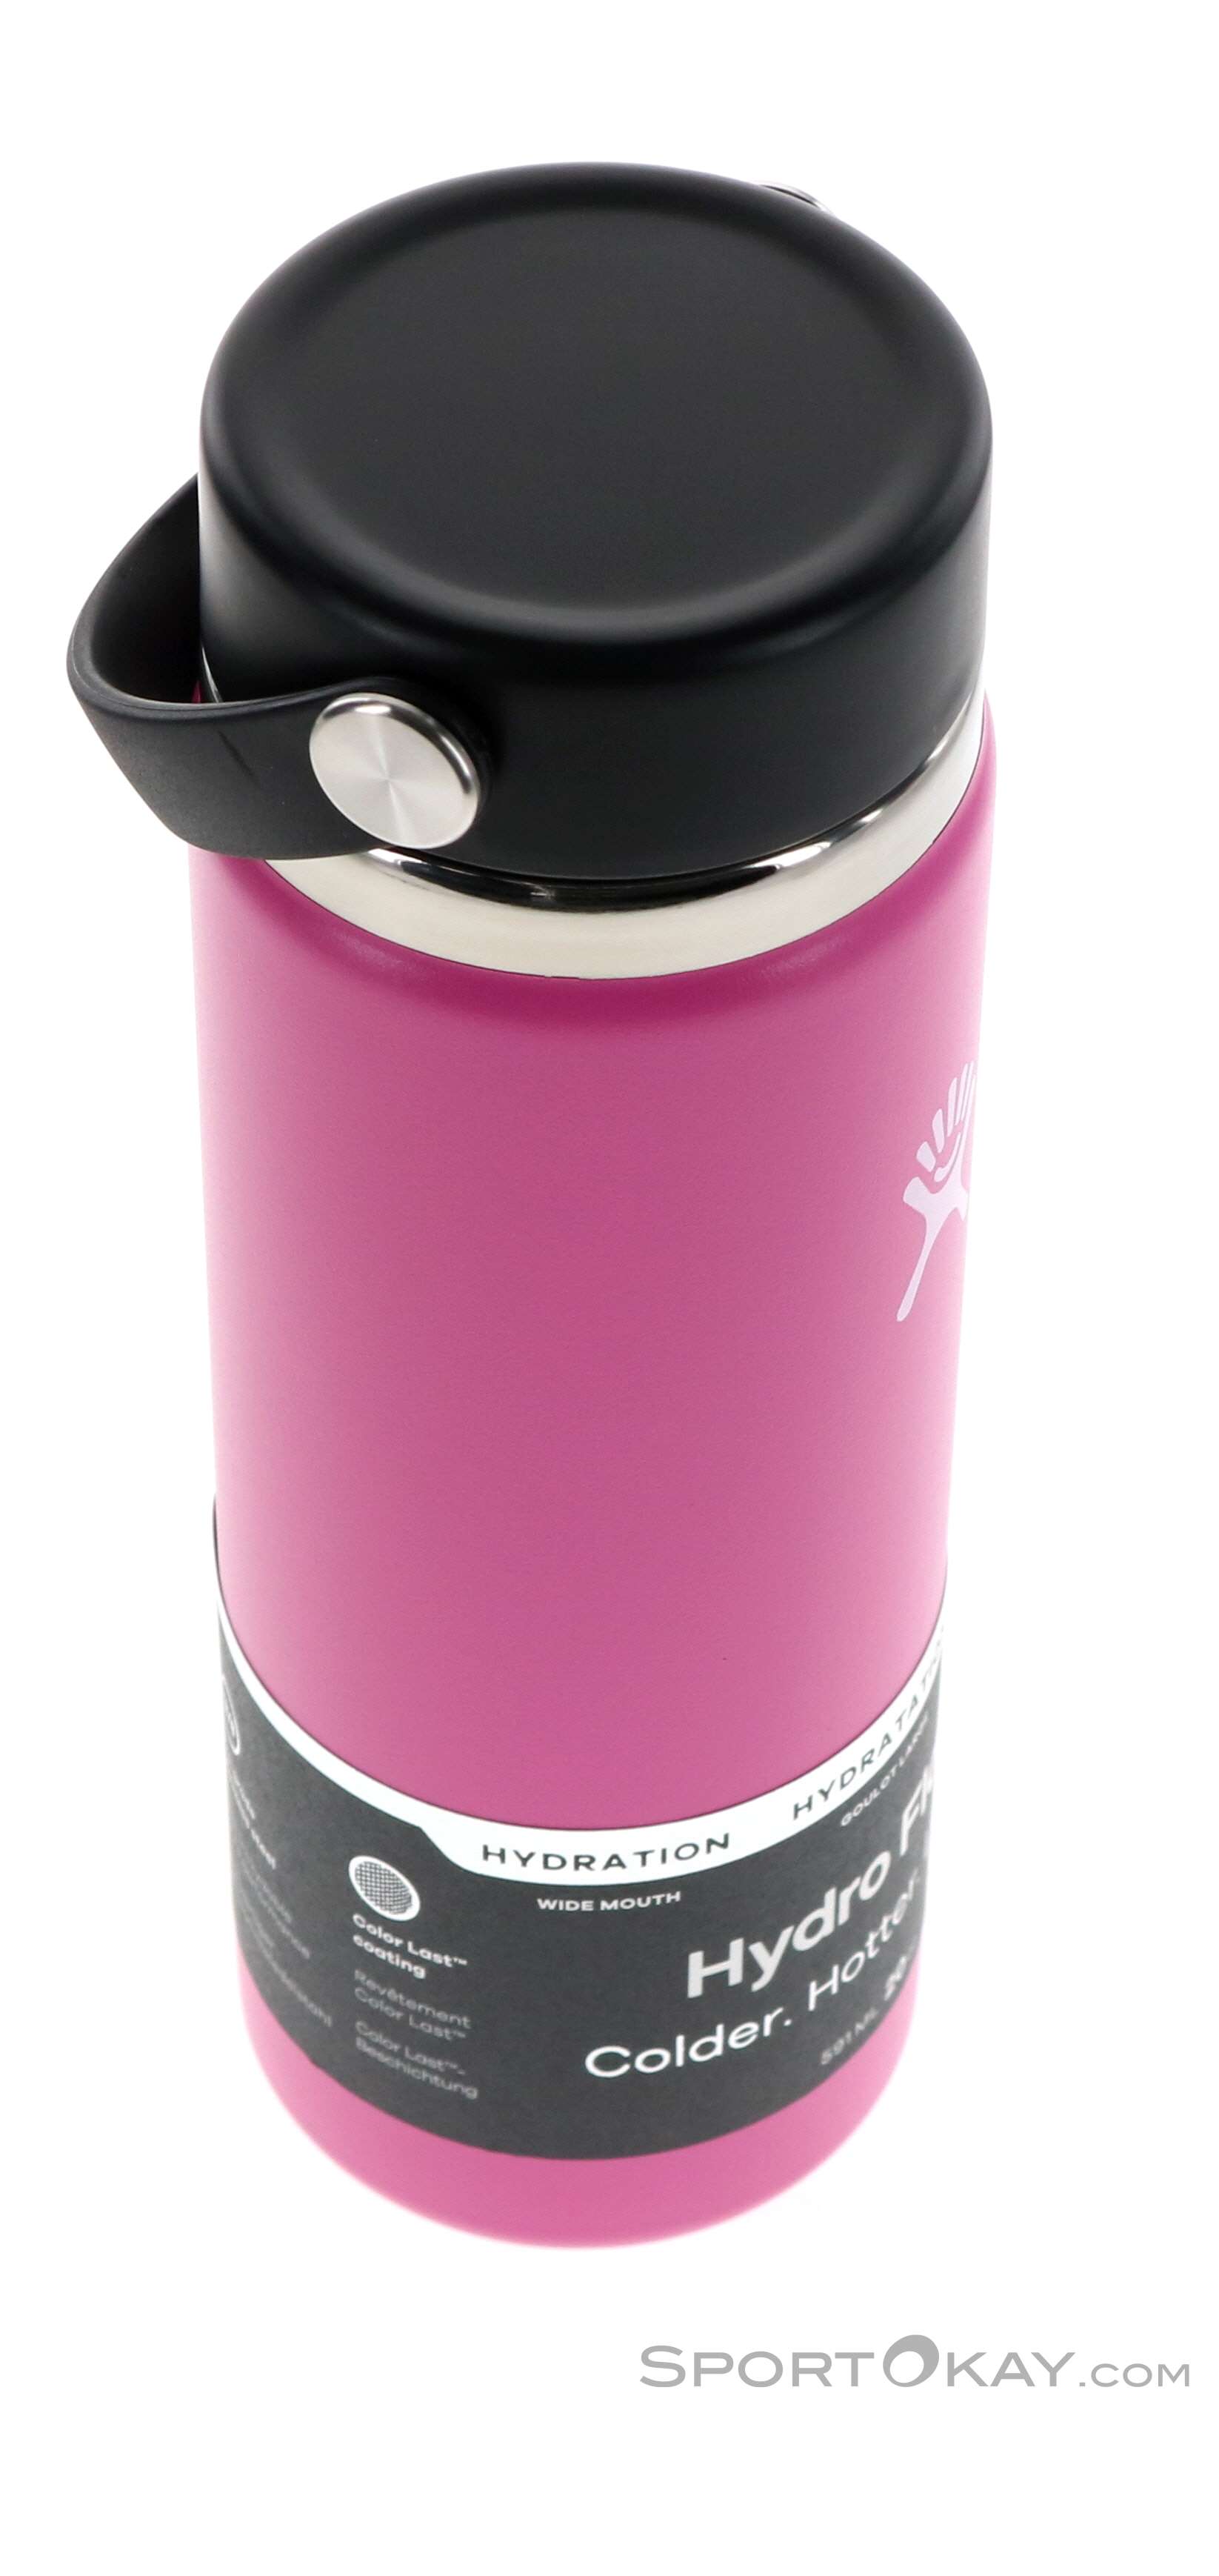 Hydro Flask 20 OZ Flex Cap Carnation 0,591 Thermos Bottle - Water Bottles -  Fitness Accessory - Fitness - All